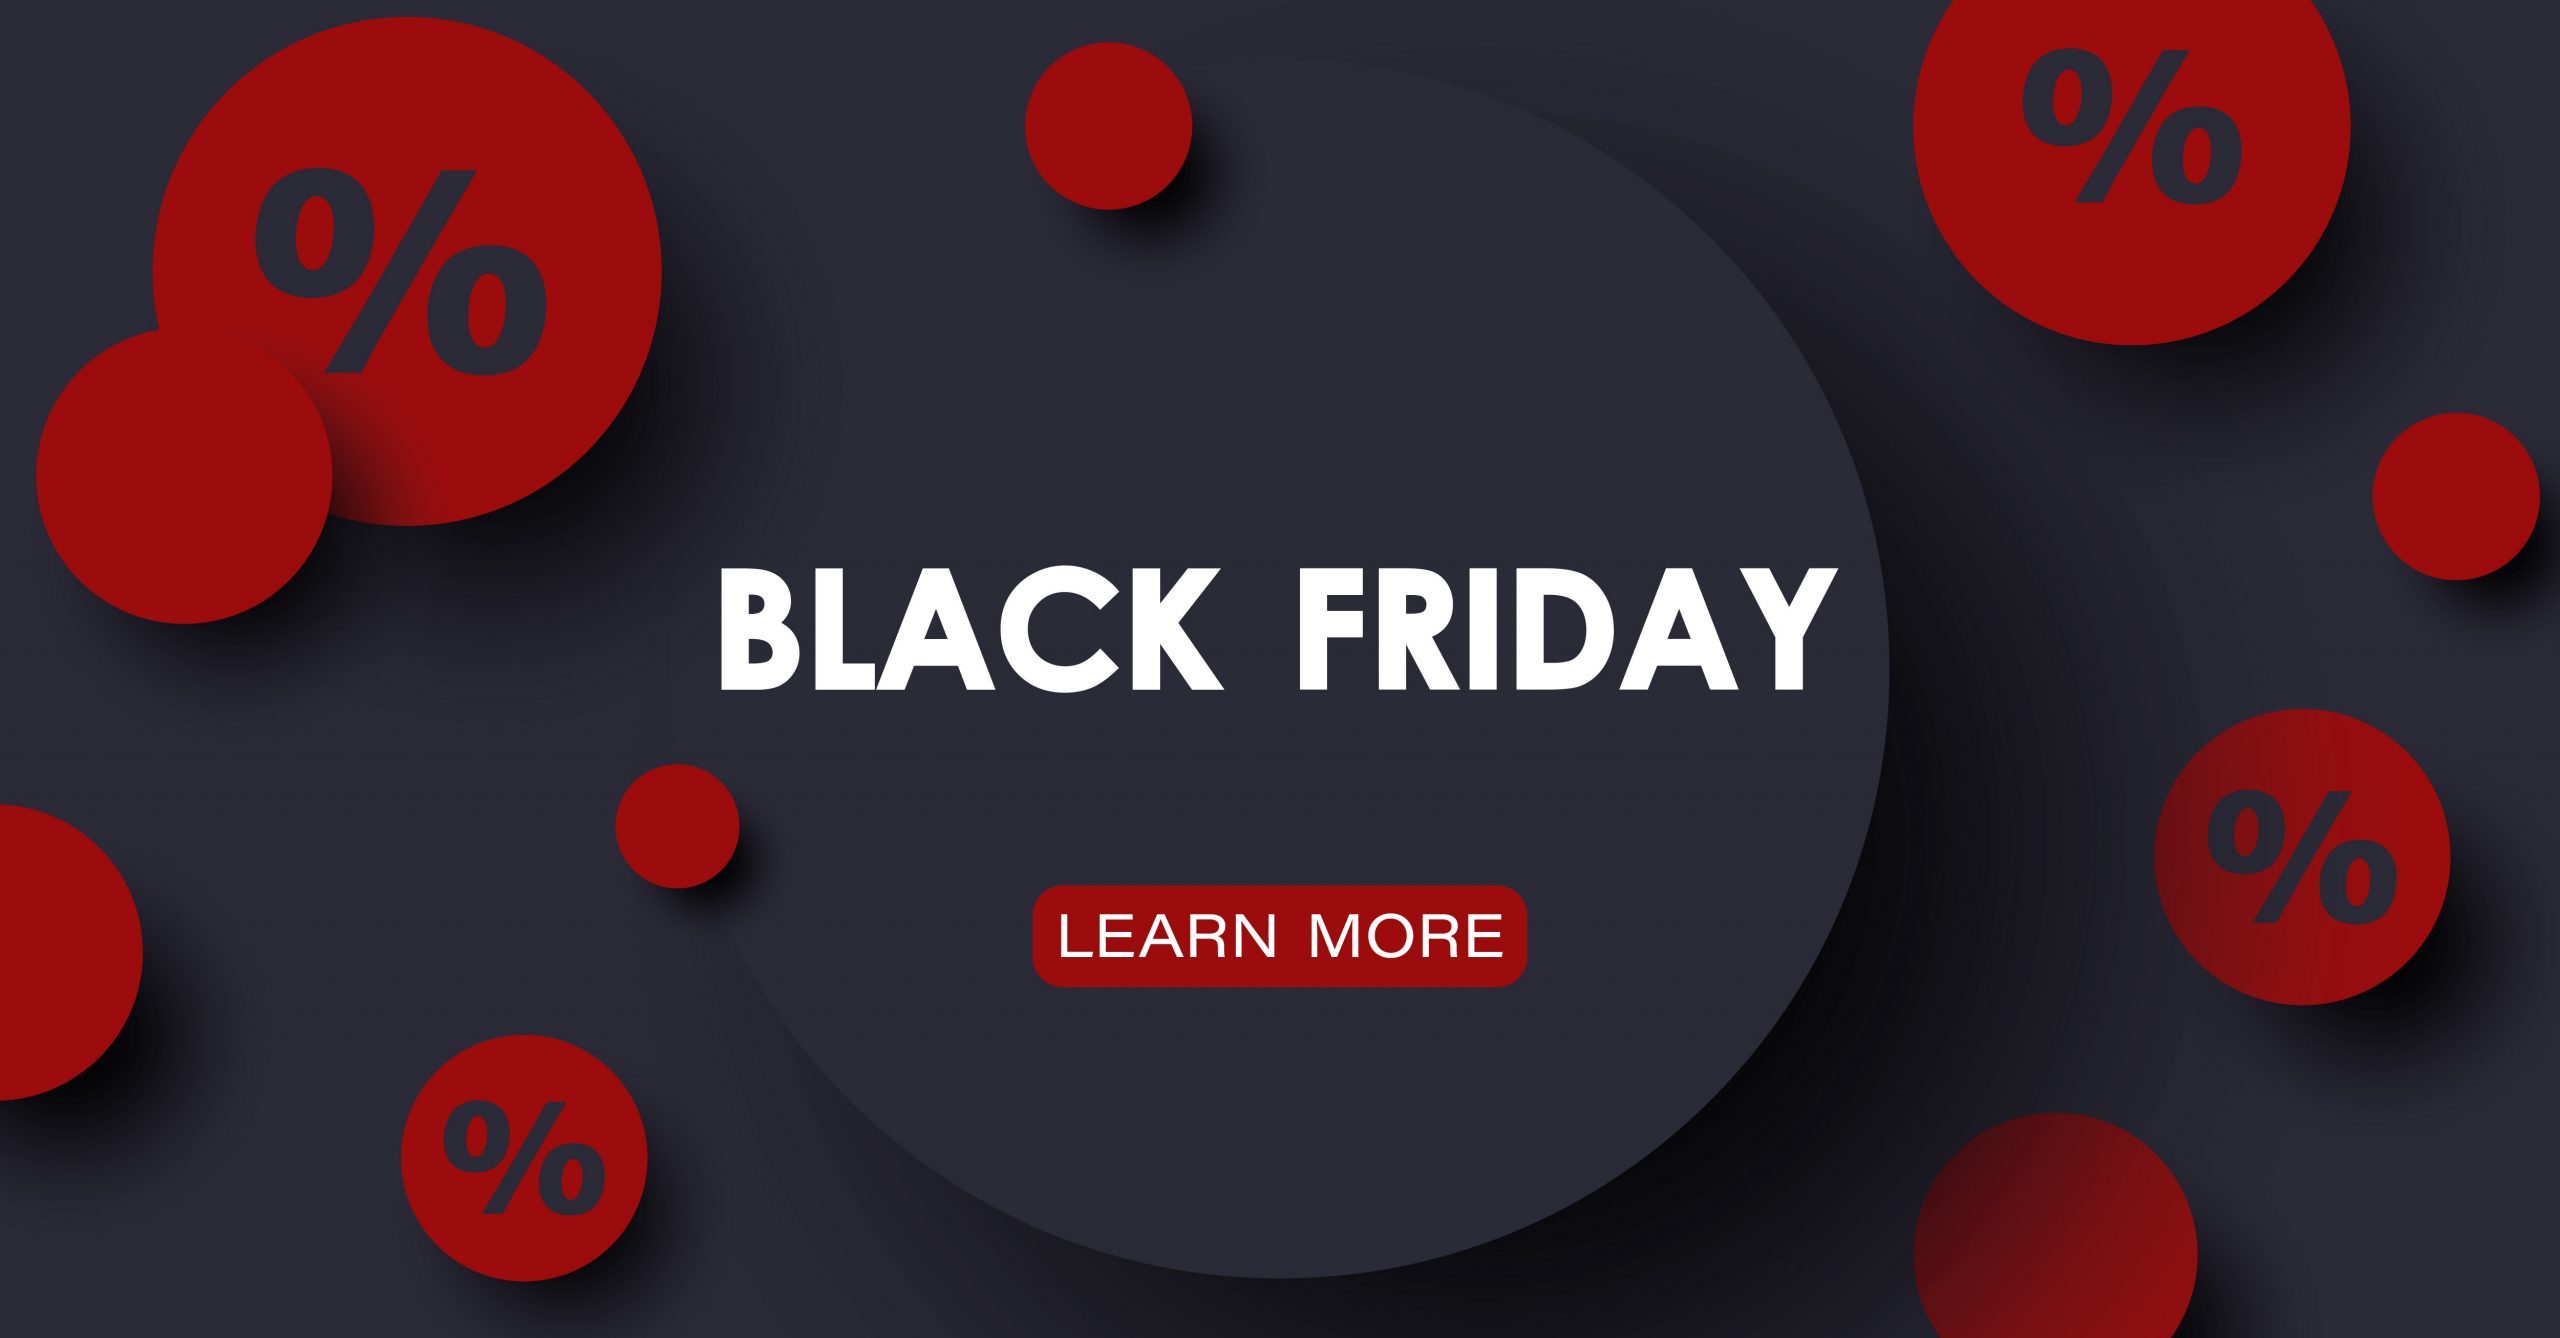 4 Last Minute Steps For A Black Friday Blowout